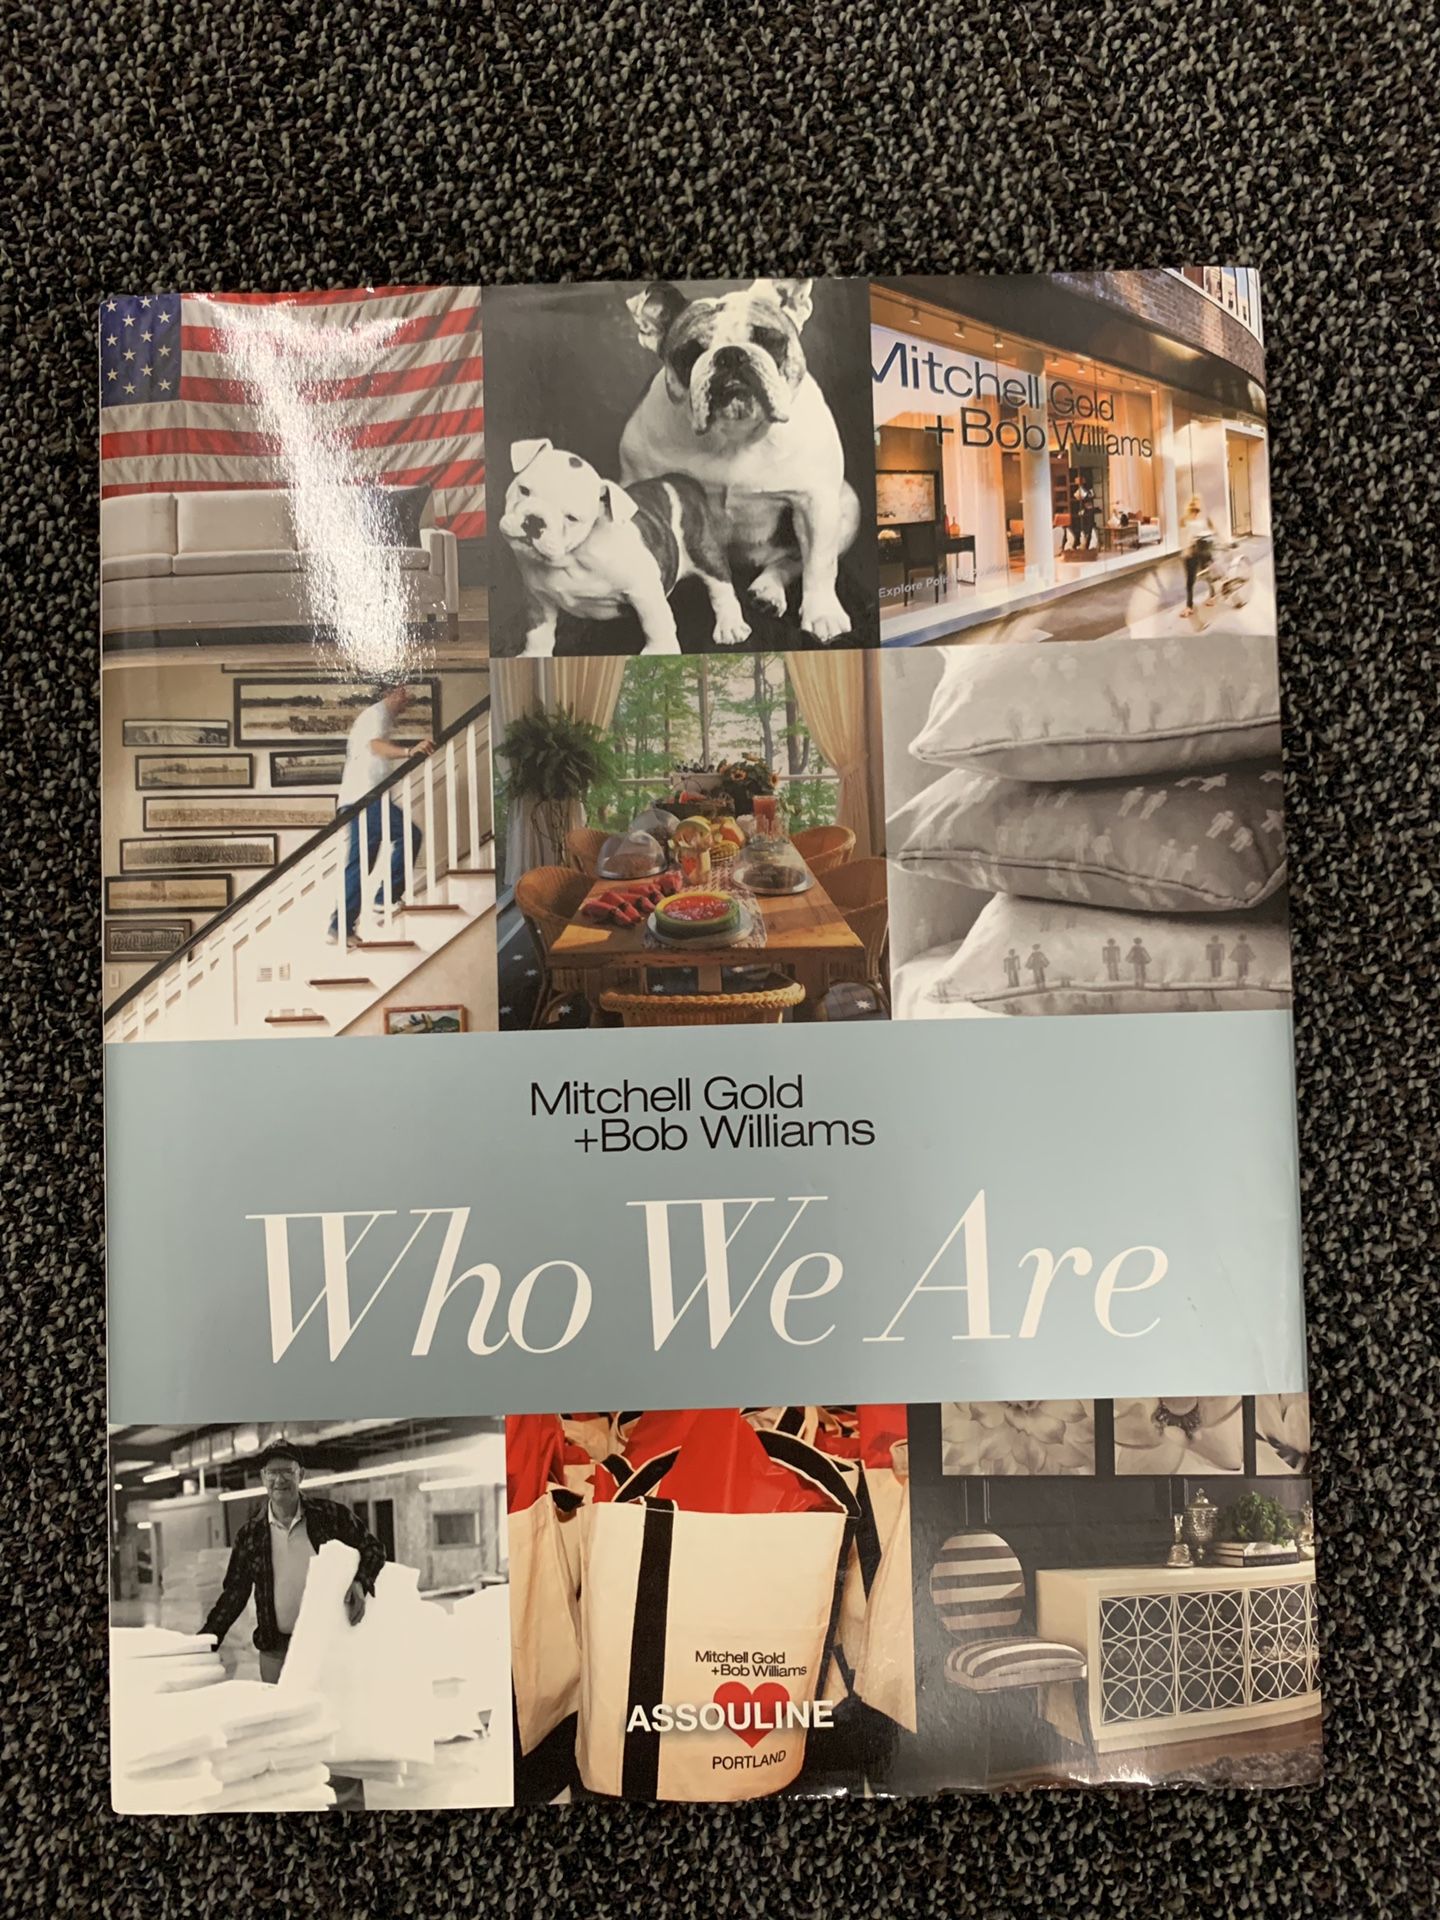 Book - Who we are by Mitchell Gold and Bob Williams